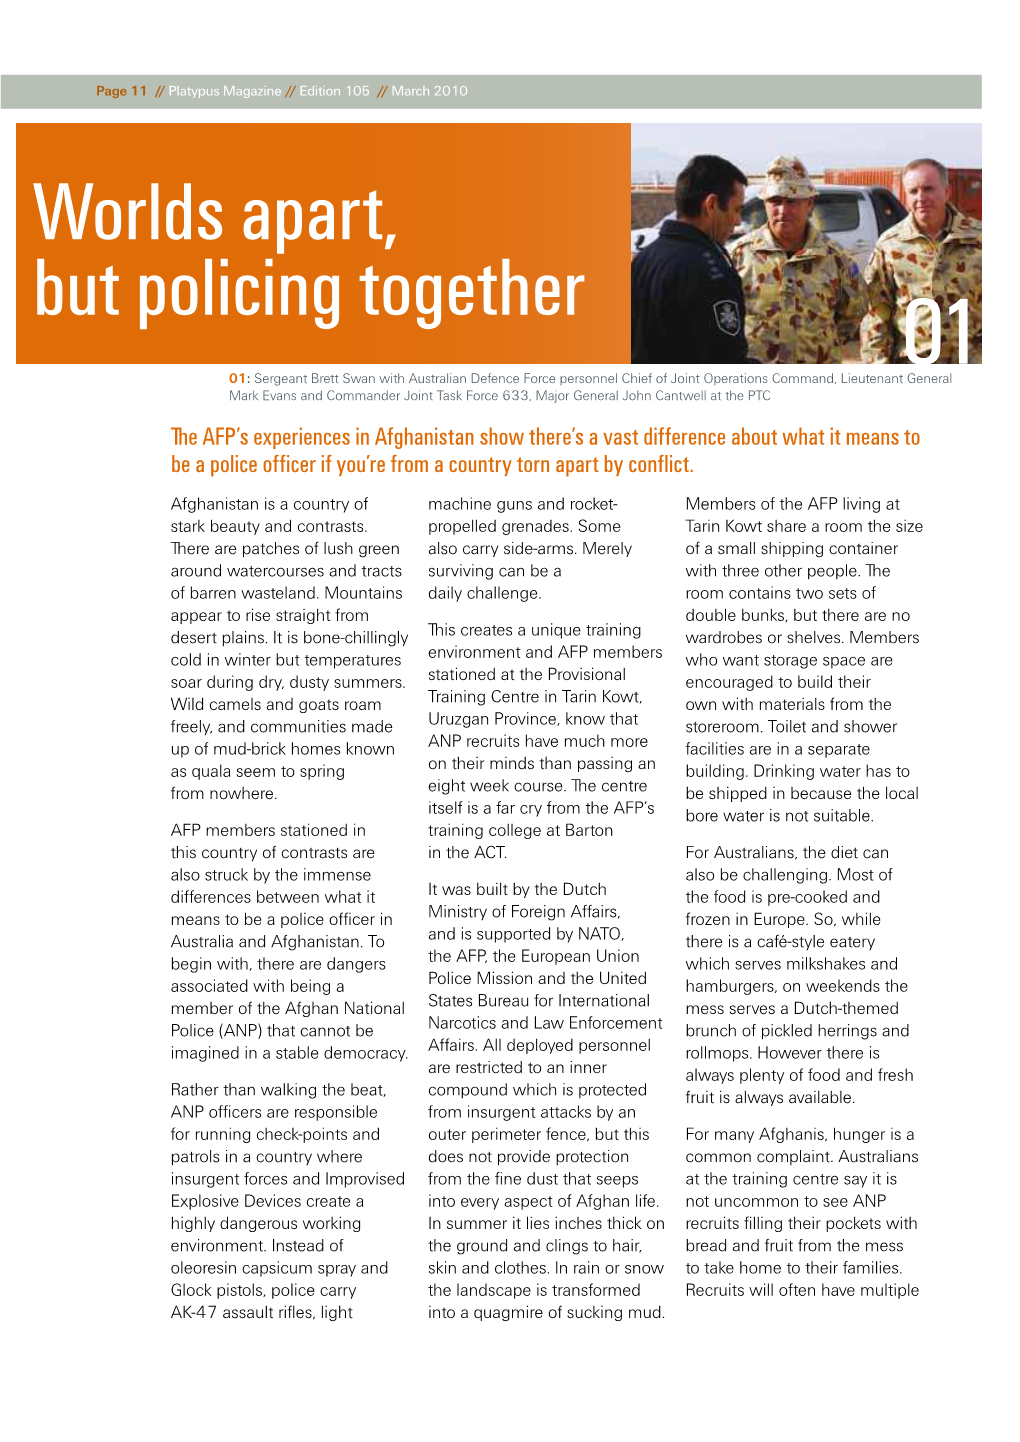 Worlds Apart, but Policing Together